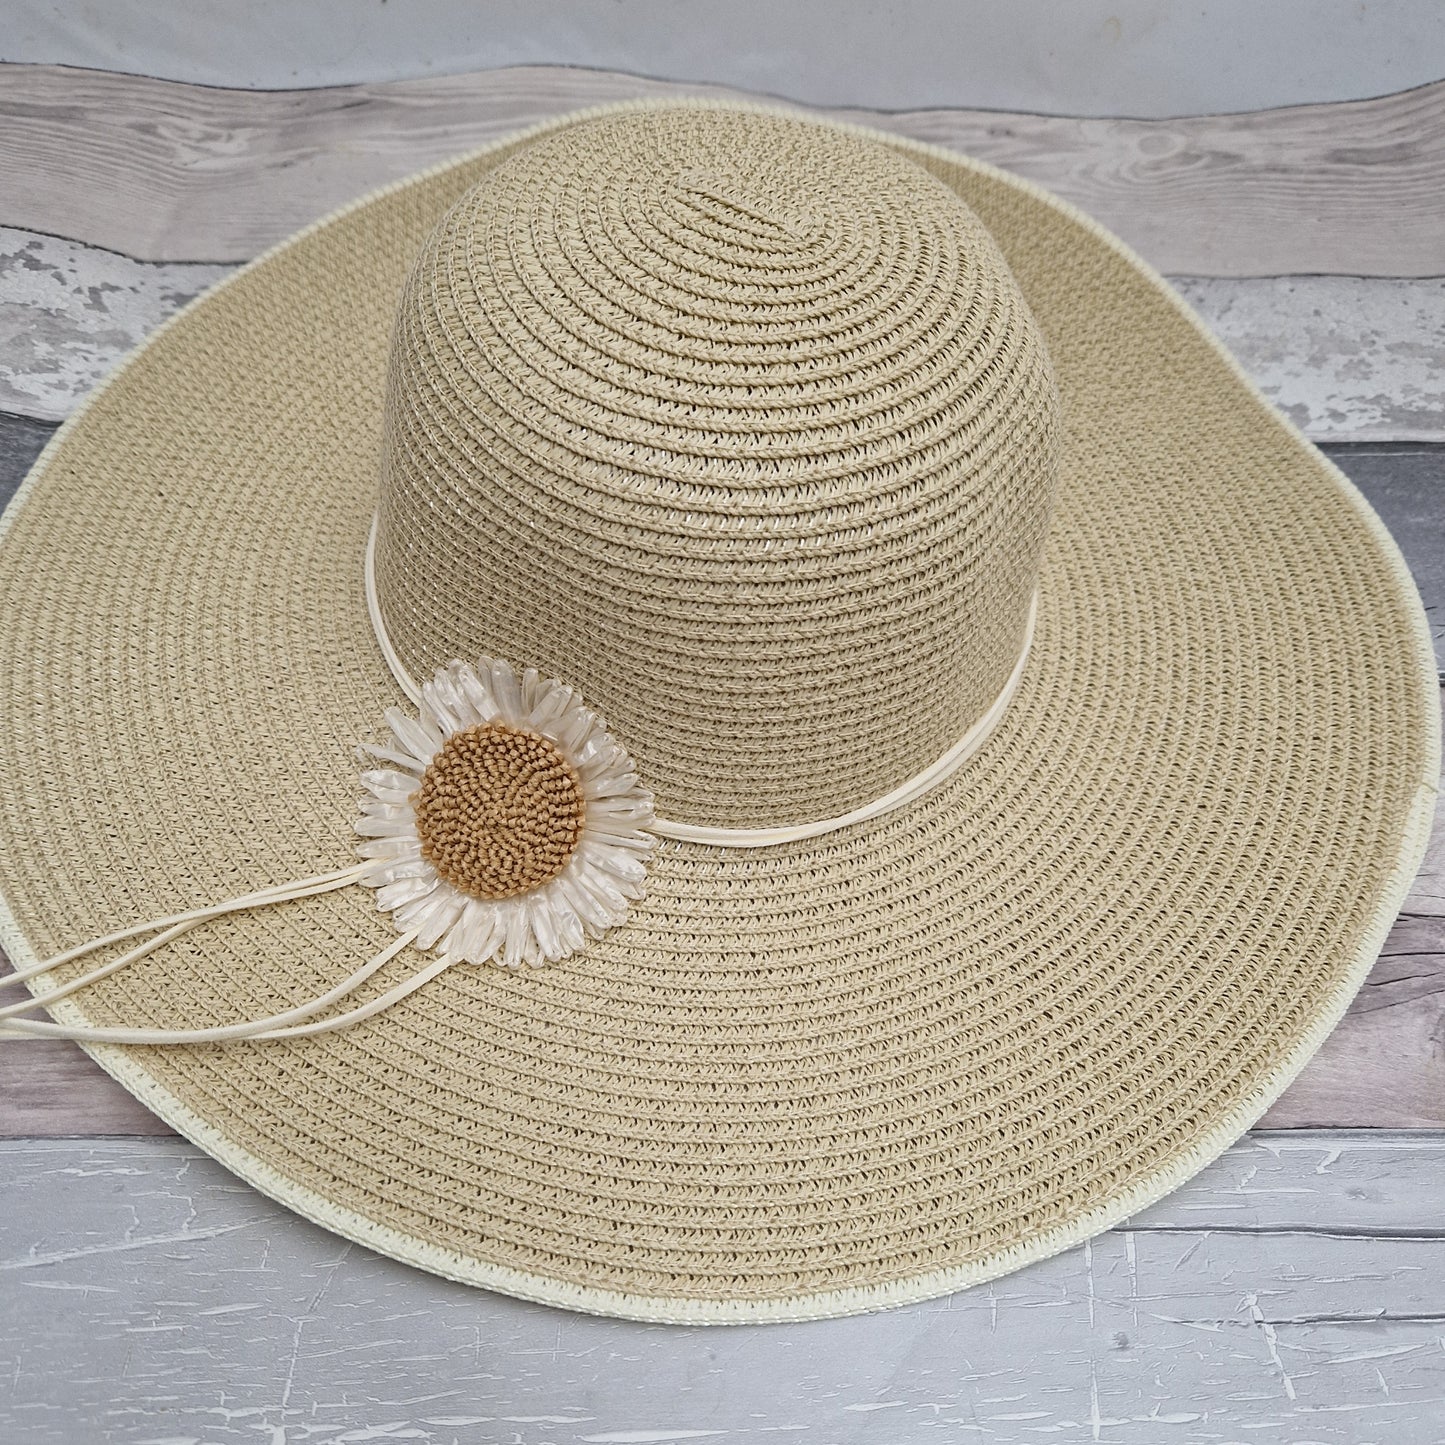 Wide brimmed hat decorated with a daisy flower.